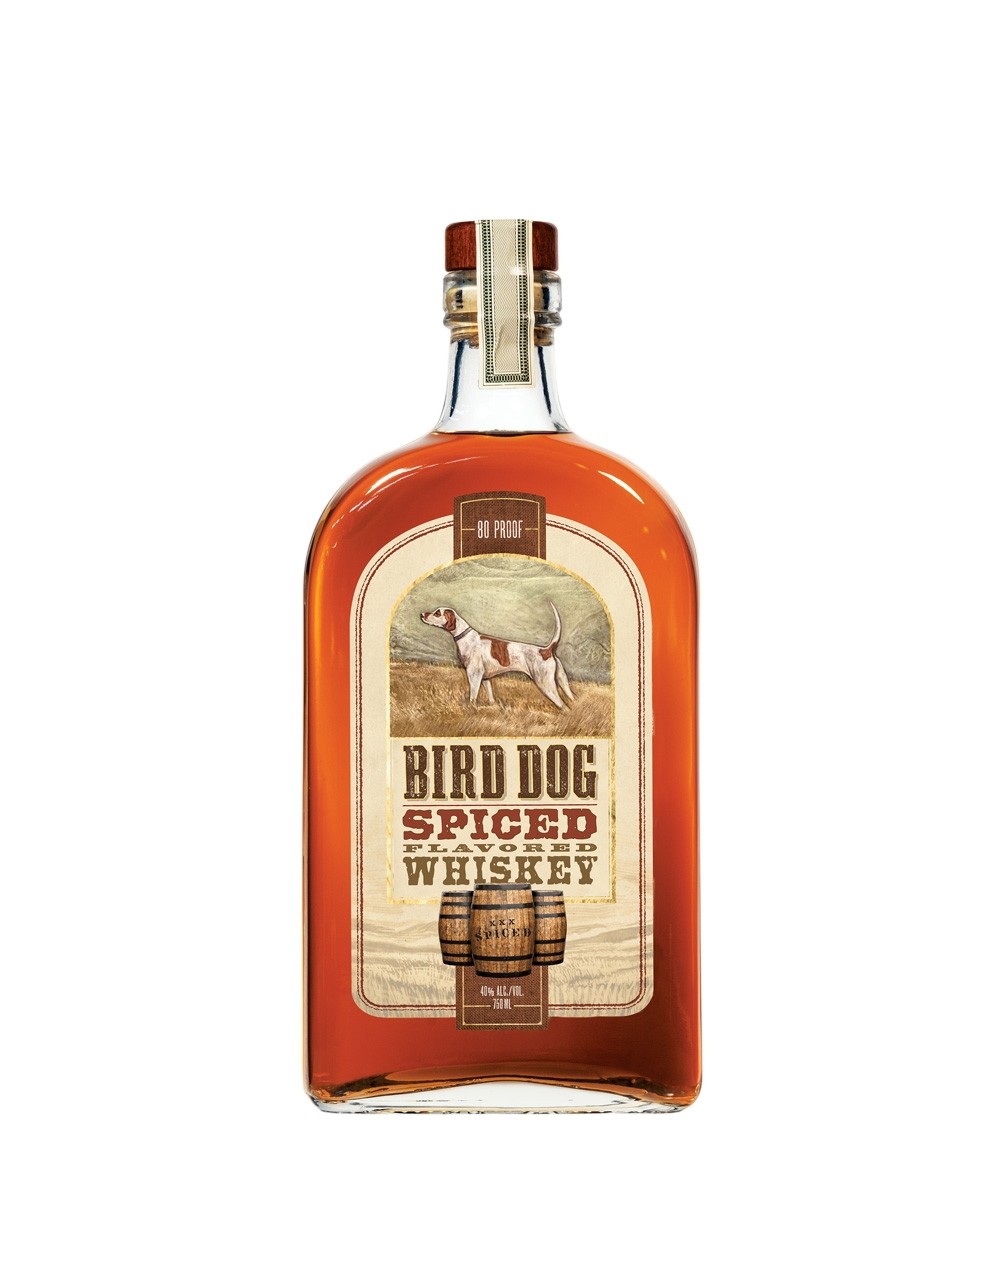 Bird Dog Spiced Flavored Whiskey Buy Online or Send as a